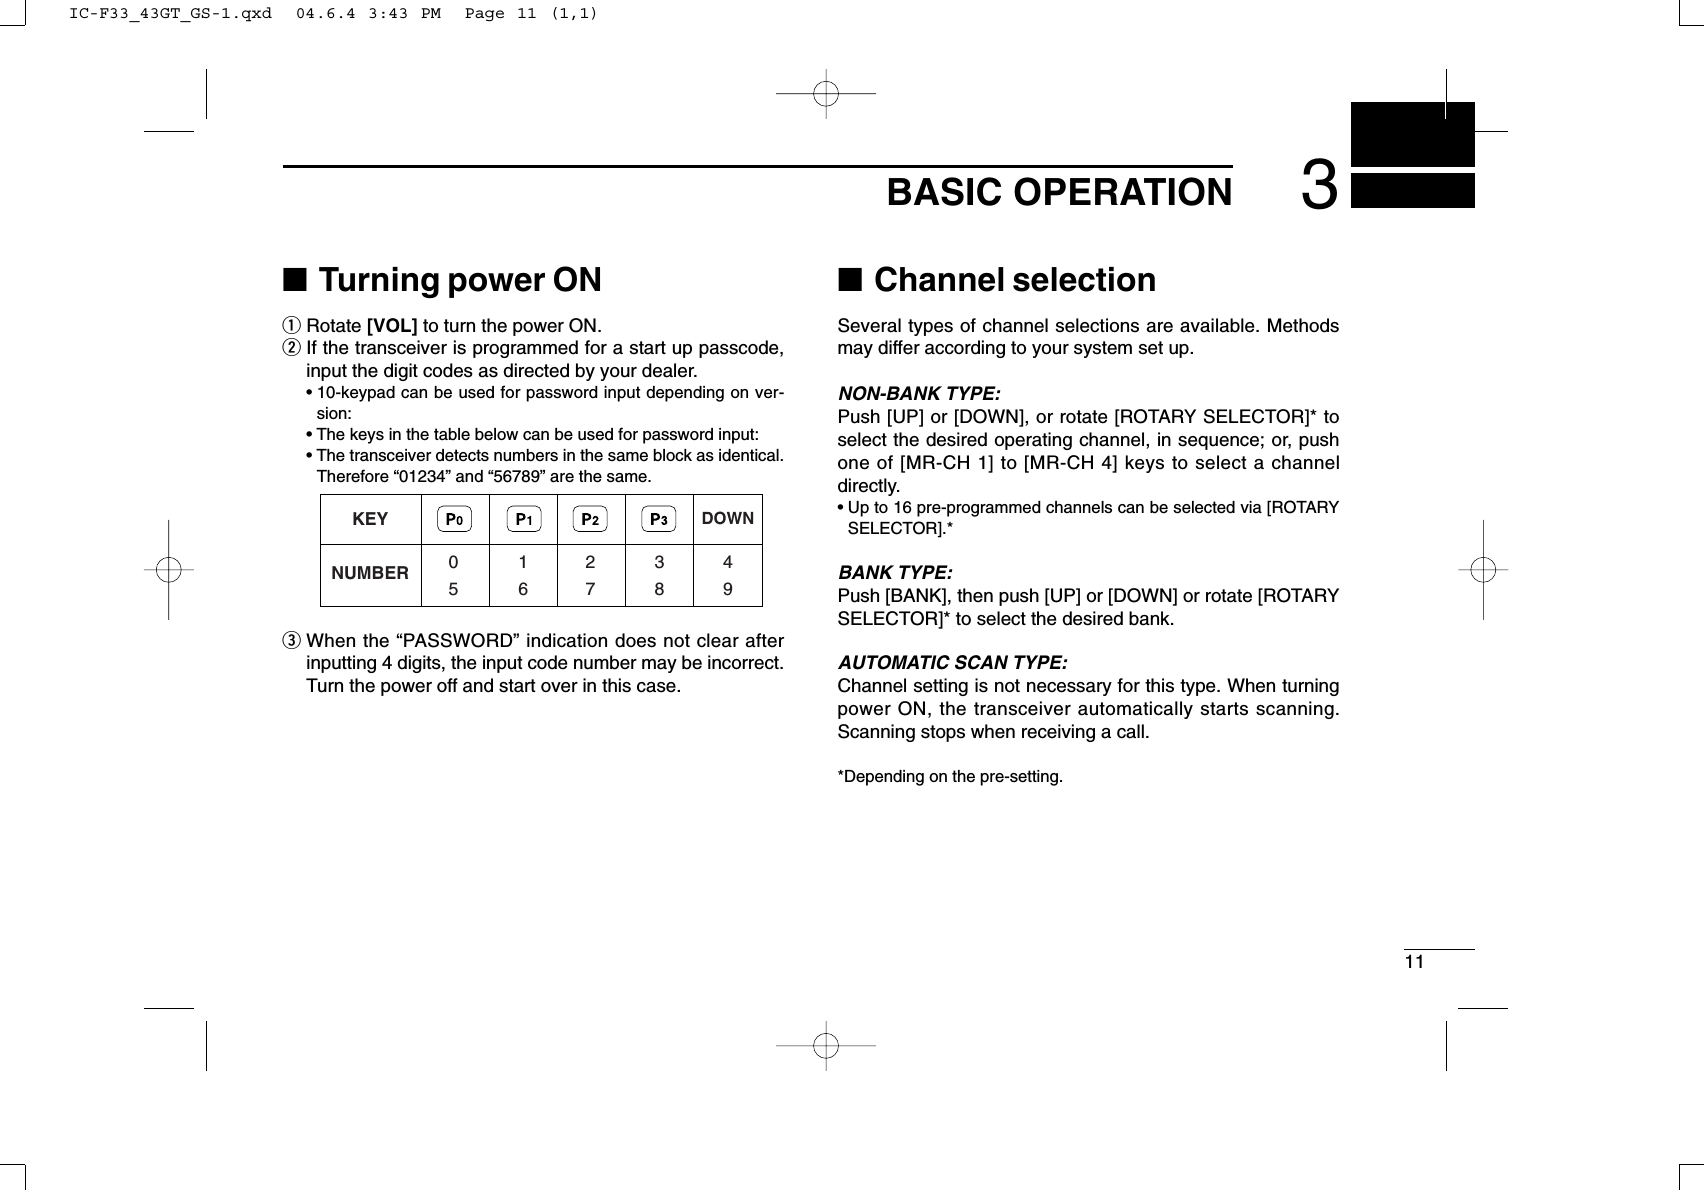 113BASIC OPERATION■Turning power ONqRotate [VOL] to turn the power ON.wIf the transceiver is programmed for a start up passcode,input the digit codes as directed by your dealer.• 10-keypad can be used for password input depending on ver-sion:• The keys in the table below can be used for password input:• The transceiver detects numbers in the same block as identical.Therefore “01234” and “56789” are the same.eWhen the “PASSWORD” indication does not clear afterinputting 4 digits, the input code number may be incorrect.Turn the power off and start over in this case.■Channel selectionSeveral types of channel selections are available. Methodsmay differ according to your system set up.NON-BANK TYPE:Push [UP] or [DOWN], or rotate [ROTARY SELECTOR]* toselect the desired operating channel, in sequence; or, pushone of [MR-CH 1] to [MR-CH 4] keys to select a channeldirectly.• Up to 16 pre-programmed channels can be selected via [ROTARYSELECTOR].*BANK TYPE:Push [BANK], then push [UP] or [DOWN] or rotate [ROTARYSELECTOR]* to select the desired bank.AUTOMATIC SCAN TYPE:Channel setting is not necessary for this type. When turningpower ON, the transceiver automatically starts scanning.Scanning stops when receiving a call.*Depending on the pre-setting.KEYNUMBER 0549382716DOWNIC-F33_43GT_GS-1.qxd  04.6.4 3:43 PM  Page 11 (1,1)